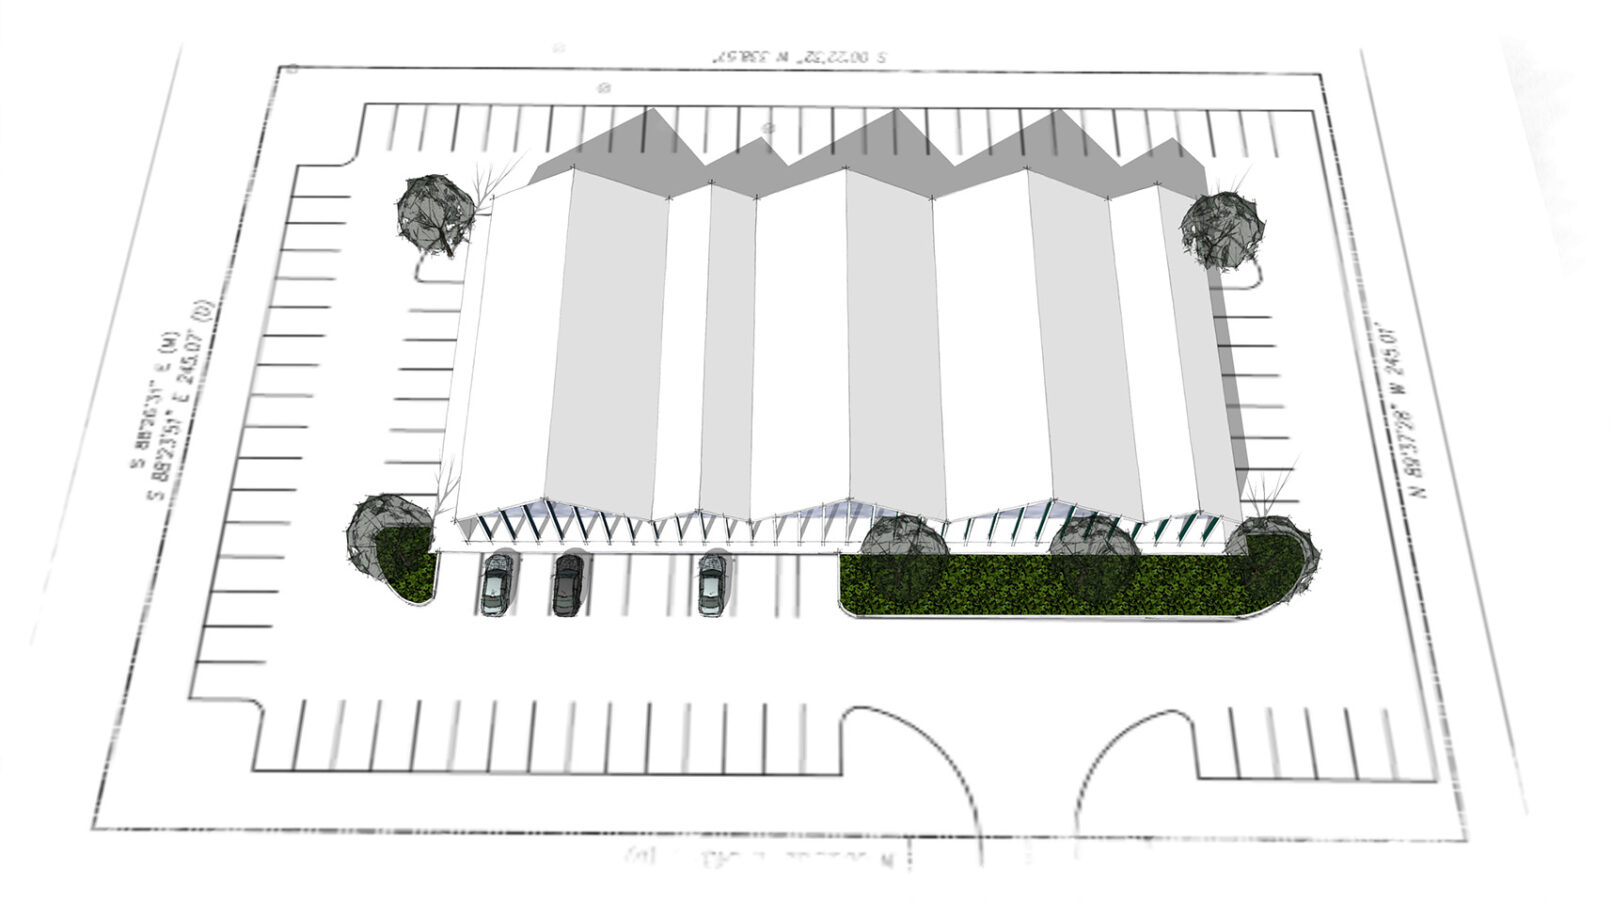 site plan of modular retail shopping center with undulating roofs